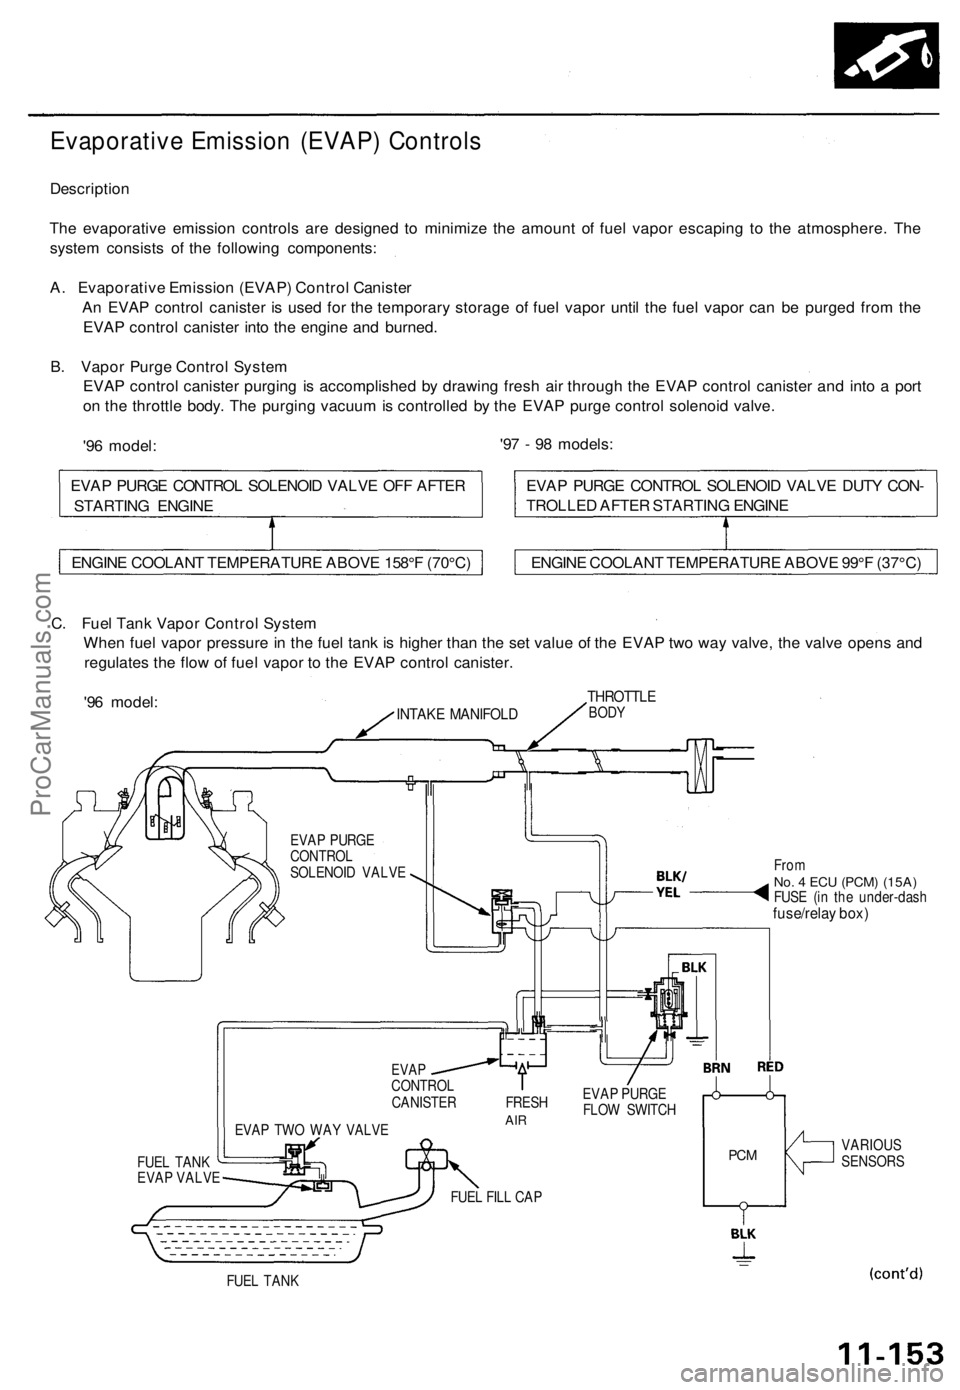 ACURA TL 1995  Service Owners Guide 
Evaporative Emission (EVAP) Controls

Description

The evaporative emission controls are designed to minimize the amount of fuel vapor escaping to the atmosphere. The

system consists of the followin